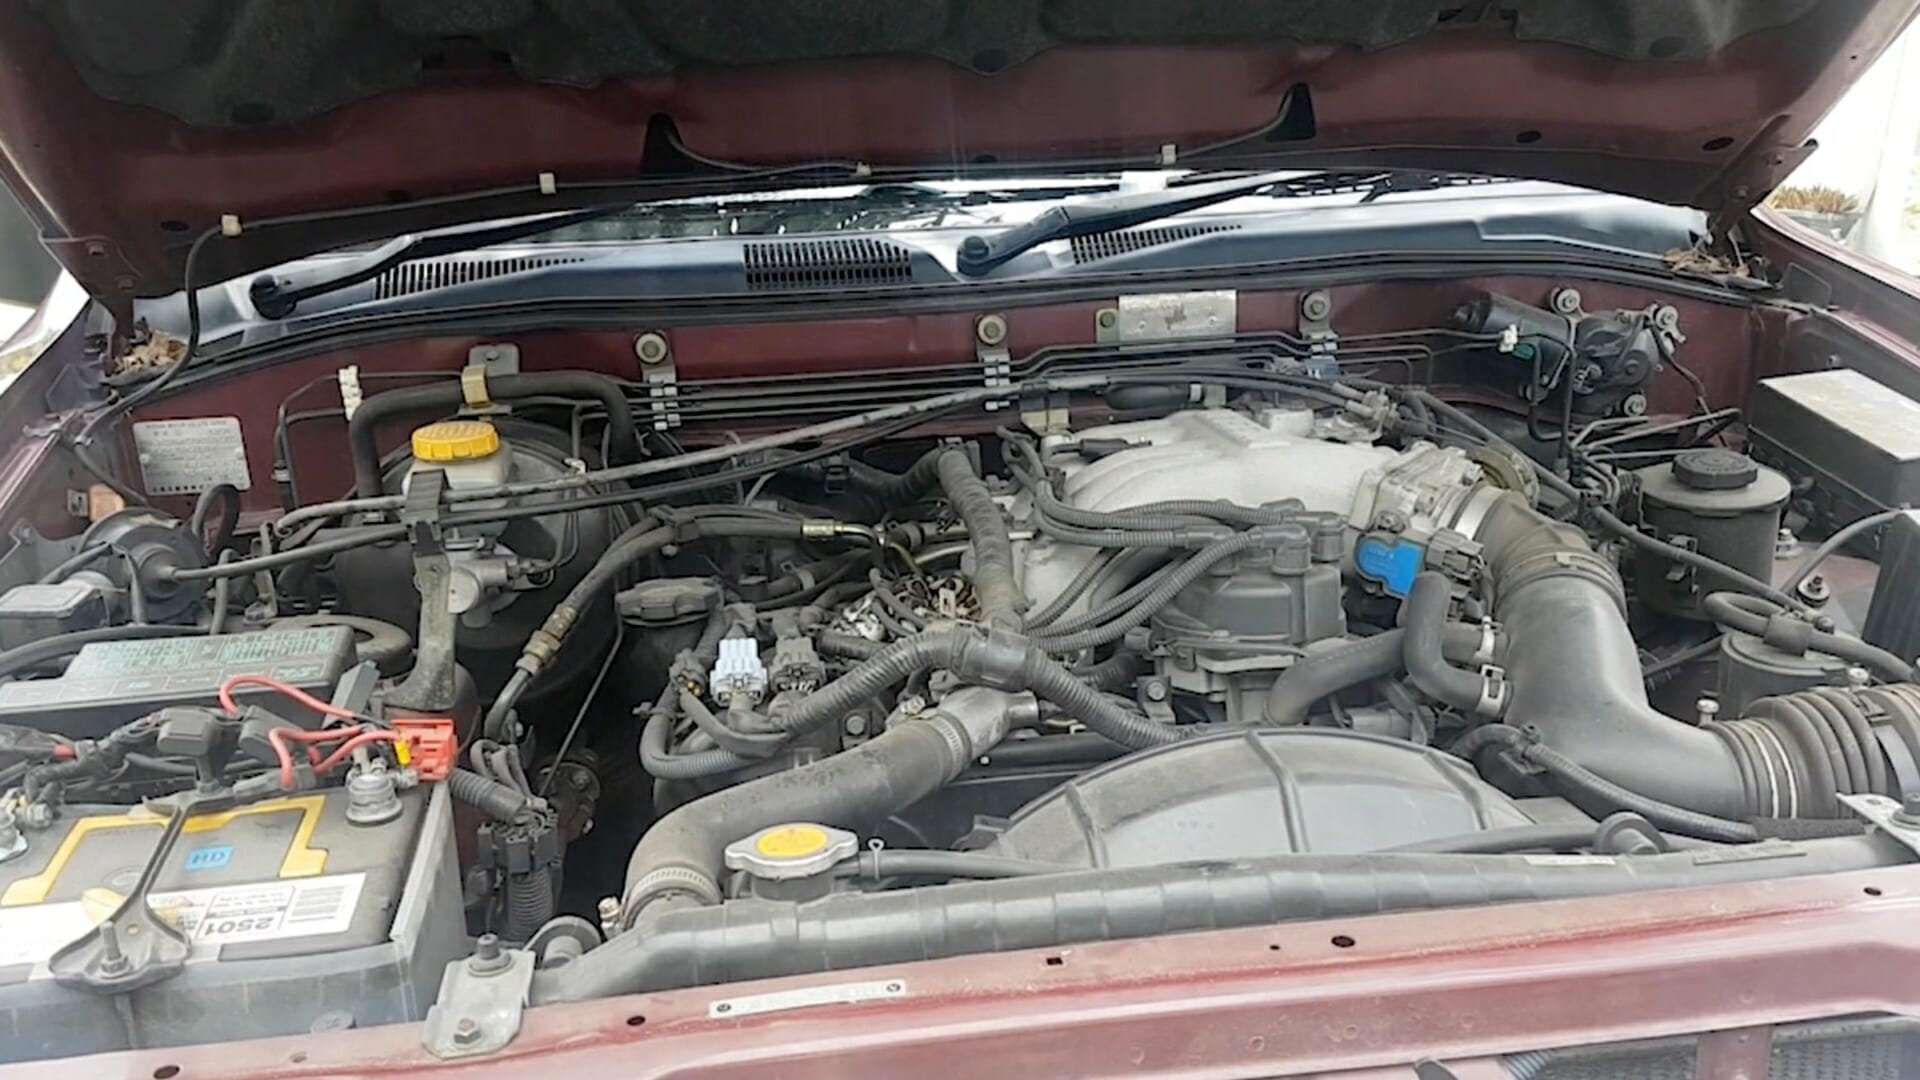 Driver finds snake hiding in car’s engine when he lifts up bonnet… but would YOU have spotted it?